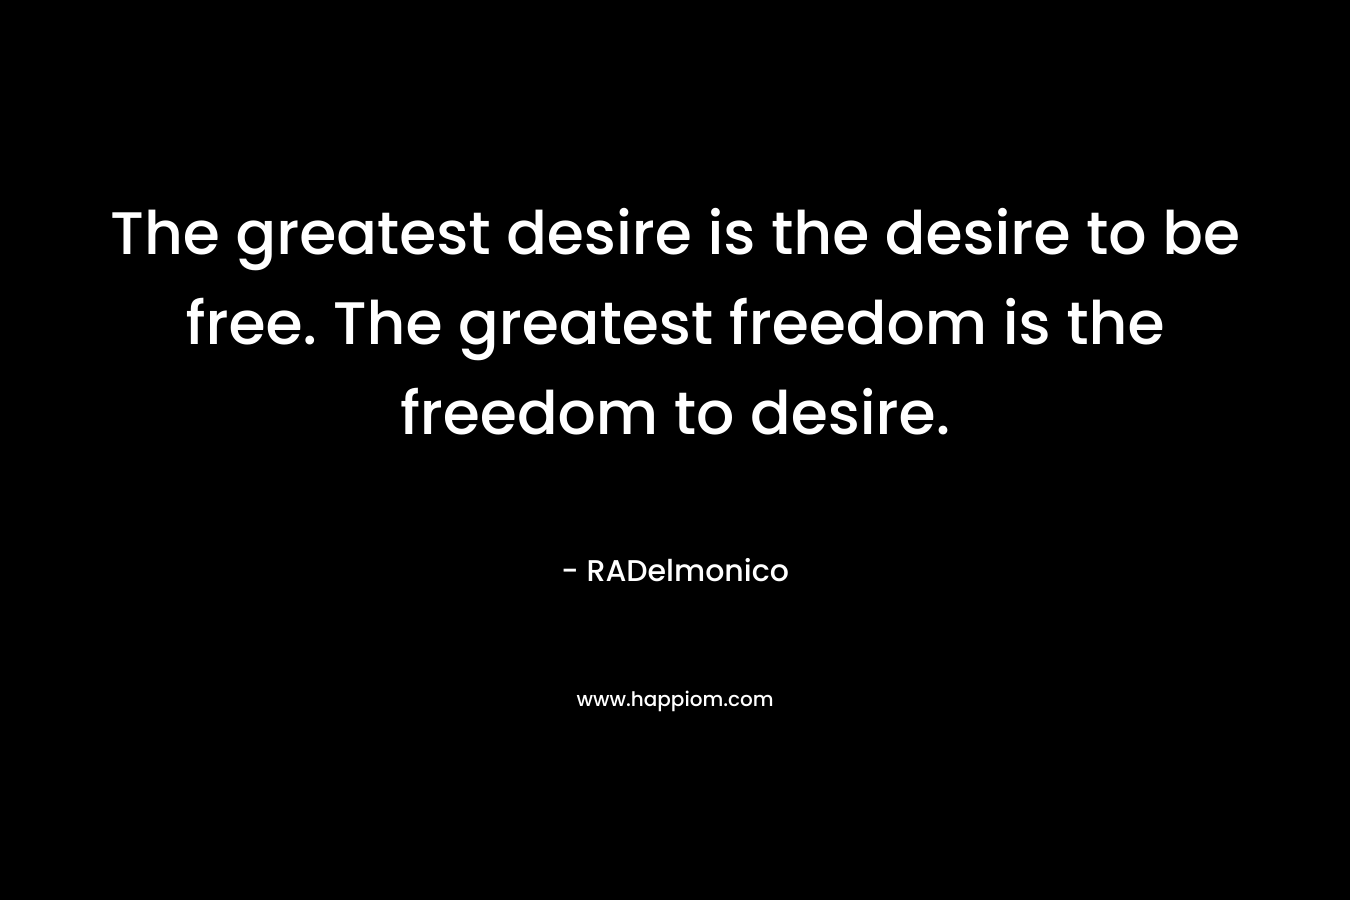 The greatest desire is the desire to be free. The greatest freedom is the freedom to desire.